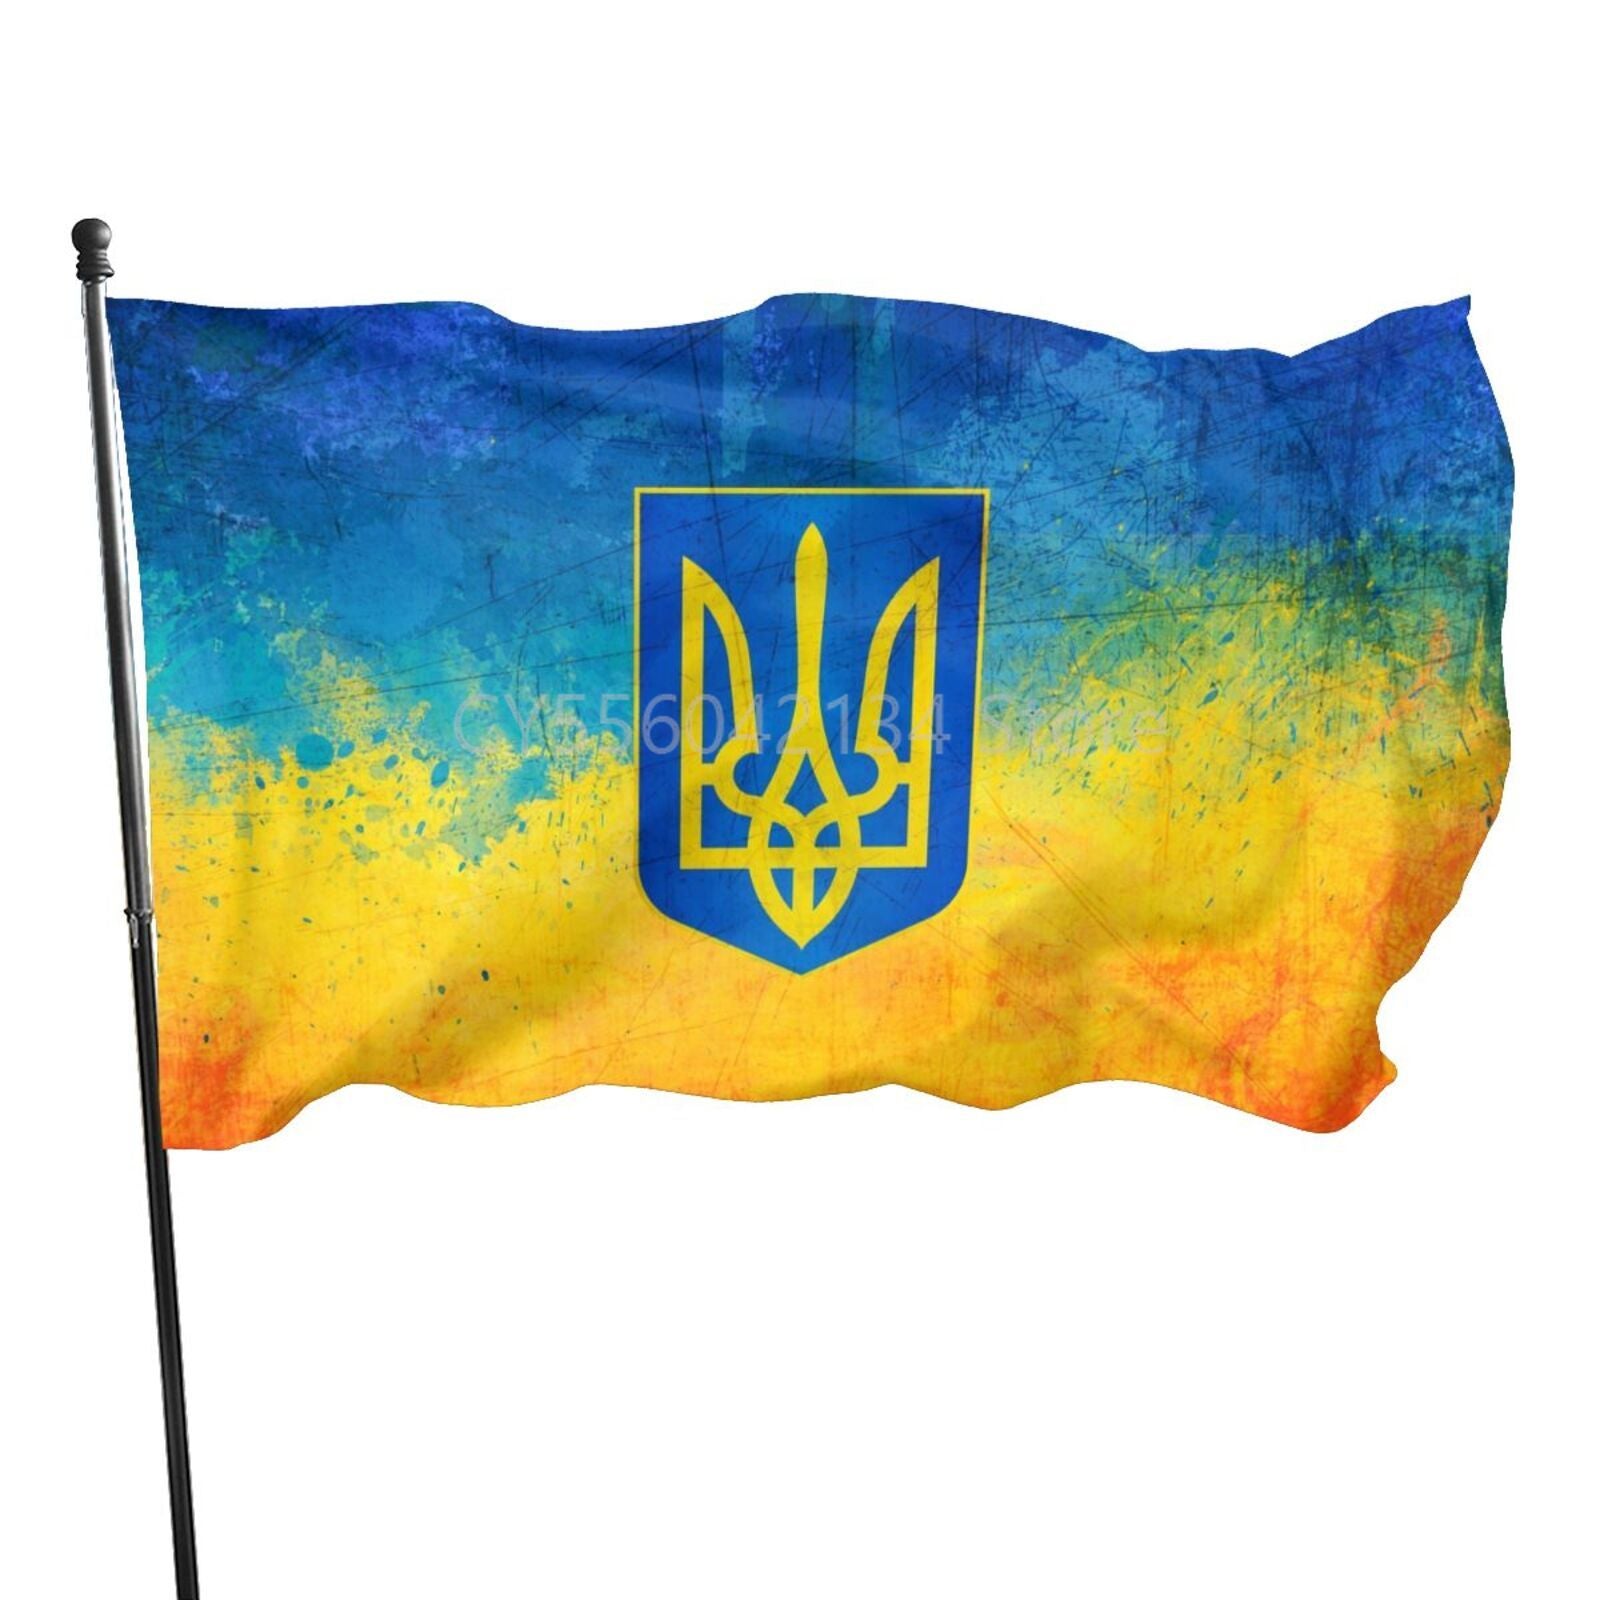 Ukraine National Flag Hanging Polyester Blue Yellow National Flags